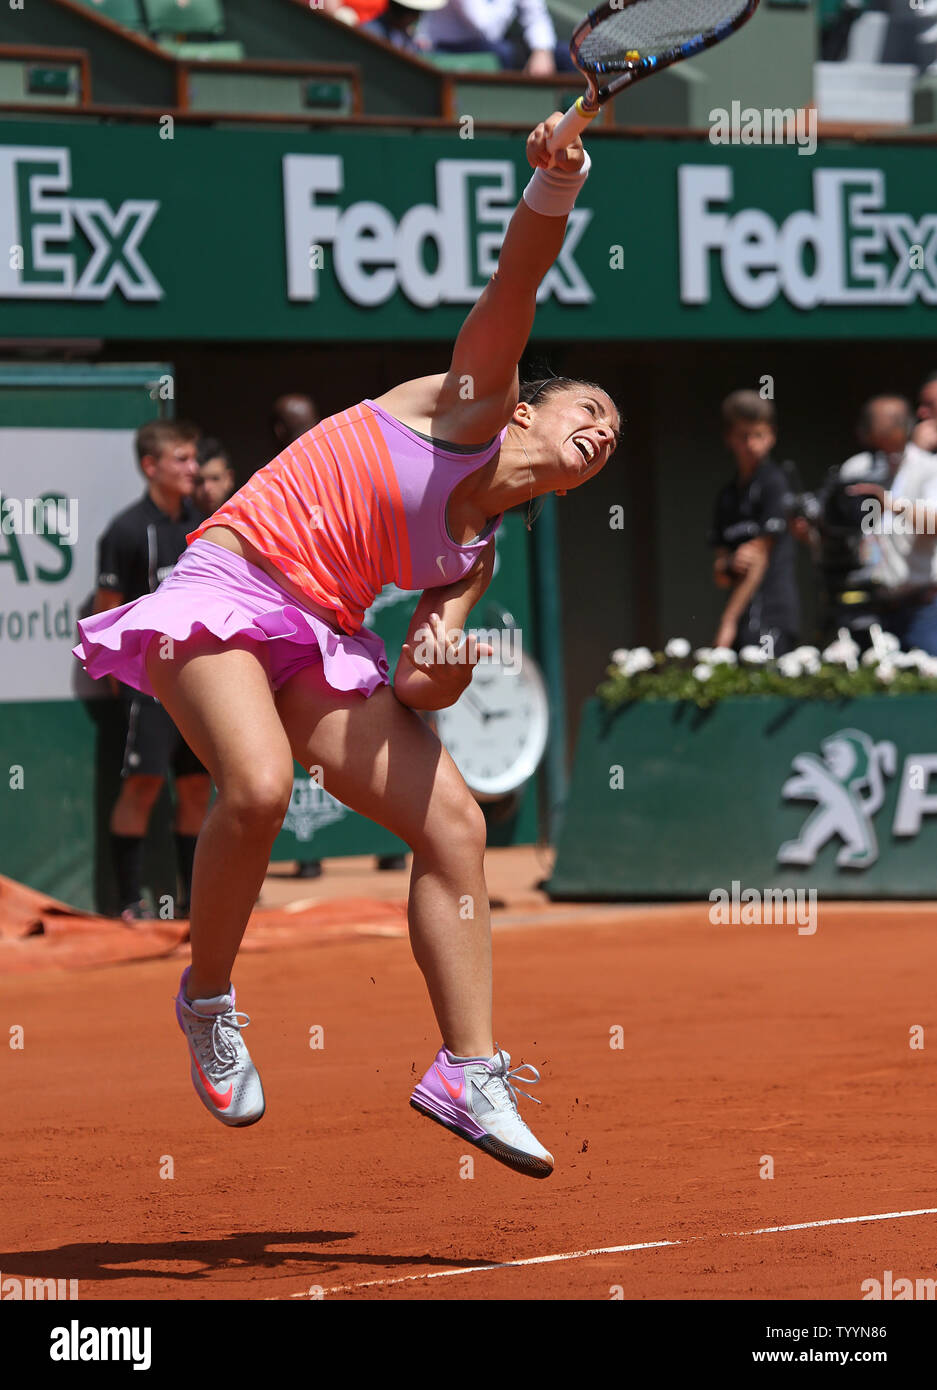 Sara Errani of Italy hits a serve during her French Open women's  quarterfinal match against American Serena Williams at Roland Garros in  Paris on June 3, 2015. Williams defeated Errani 6-1, 6-3